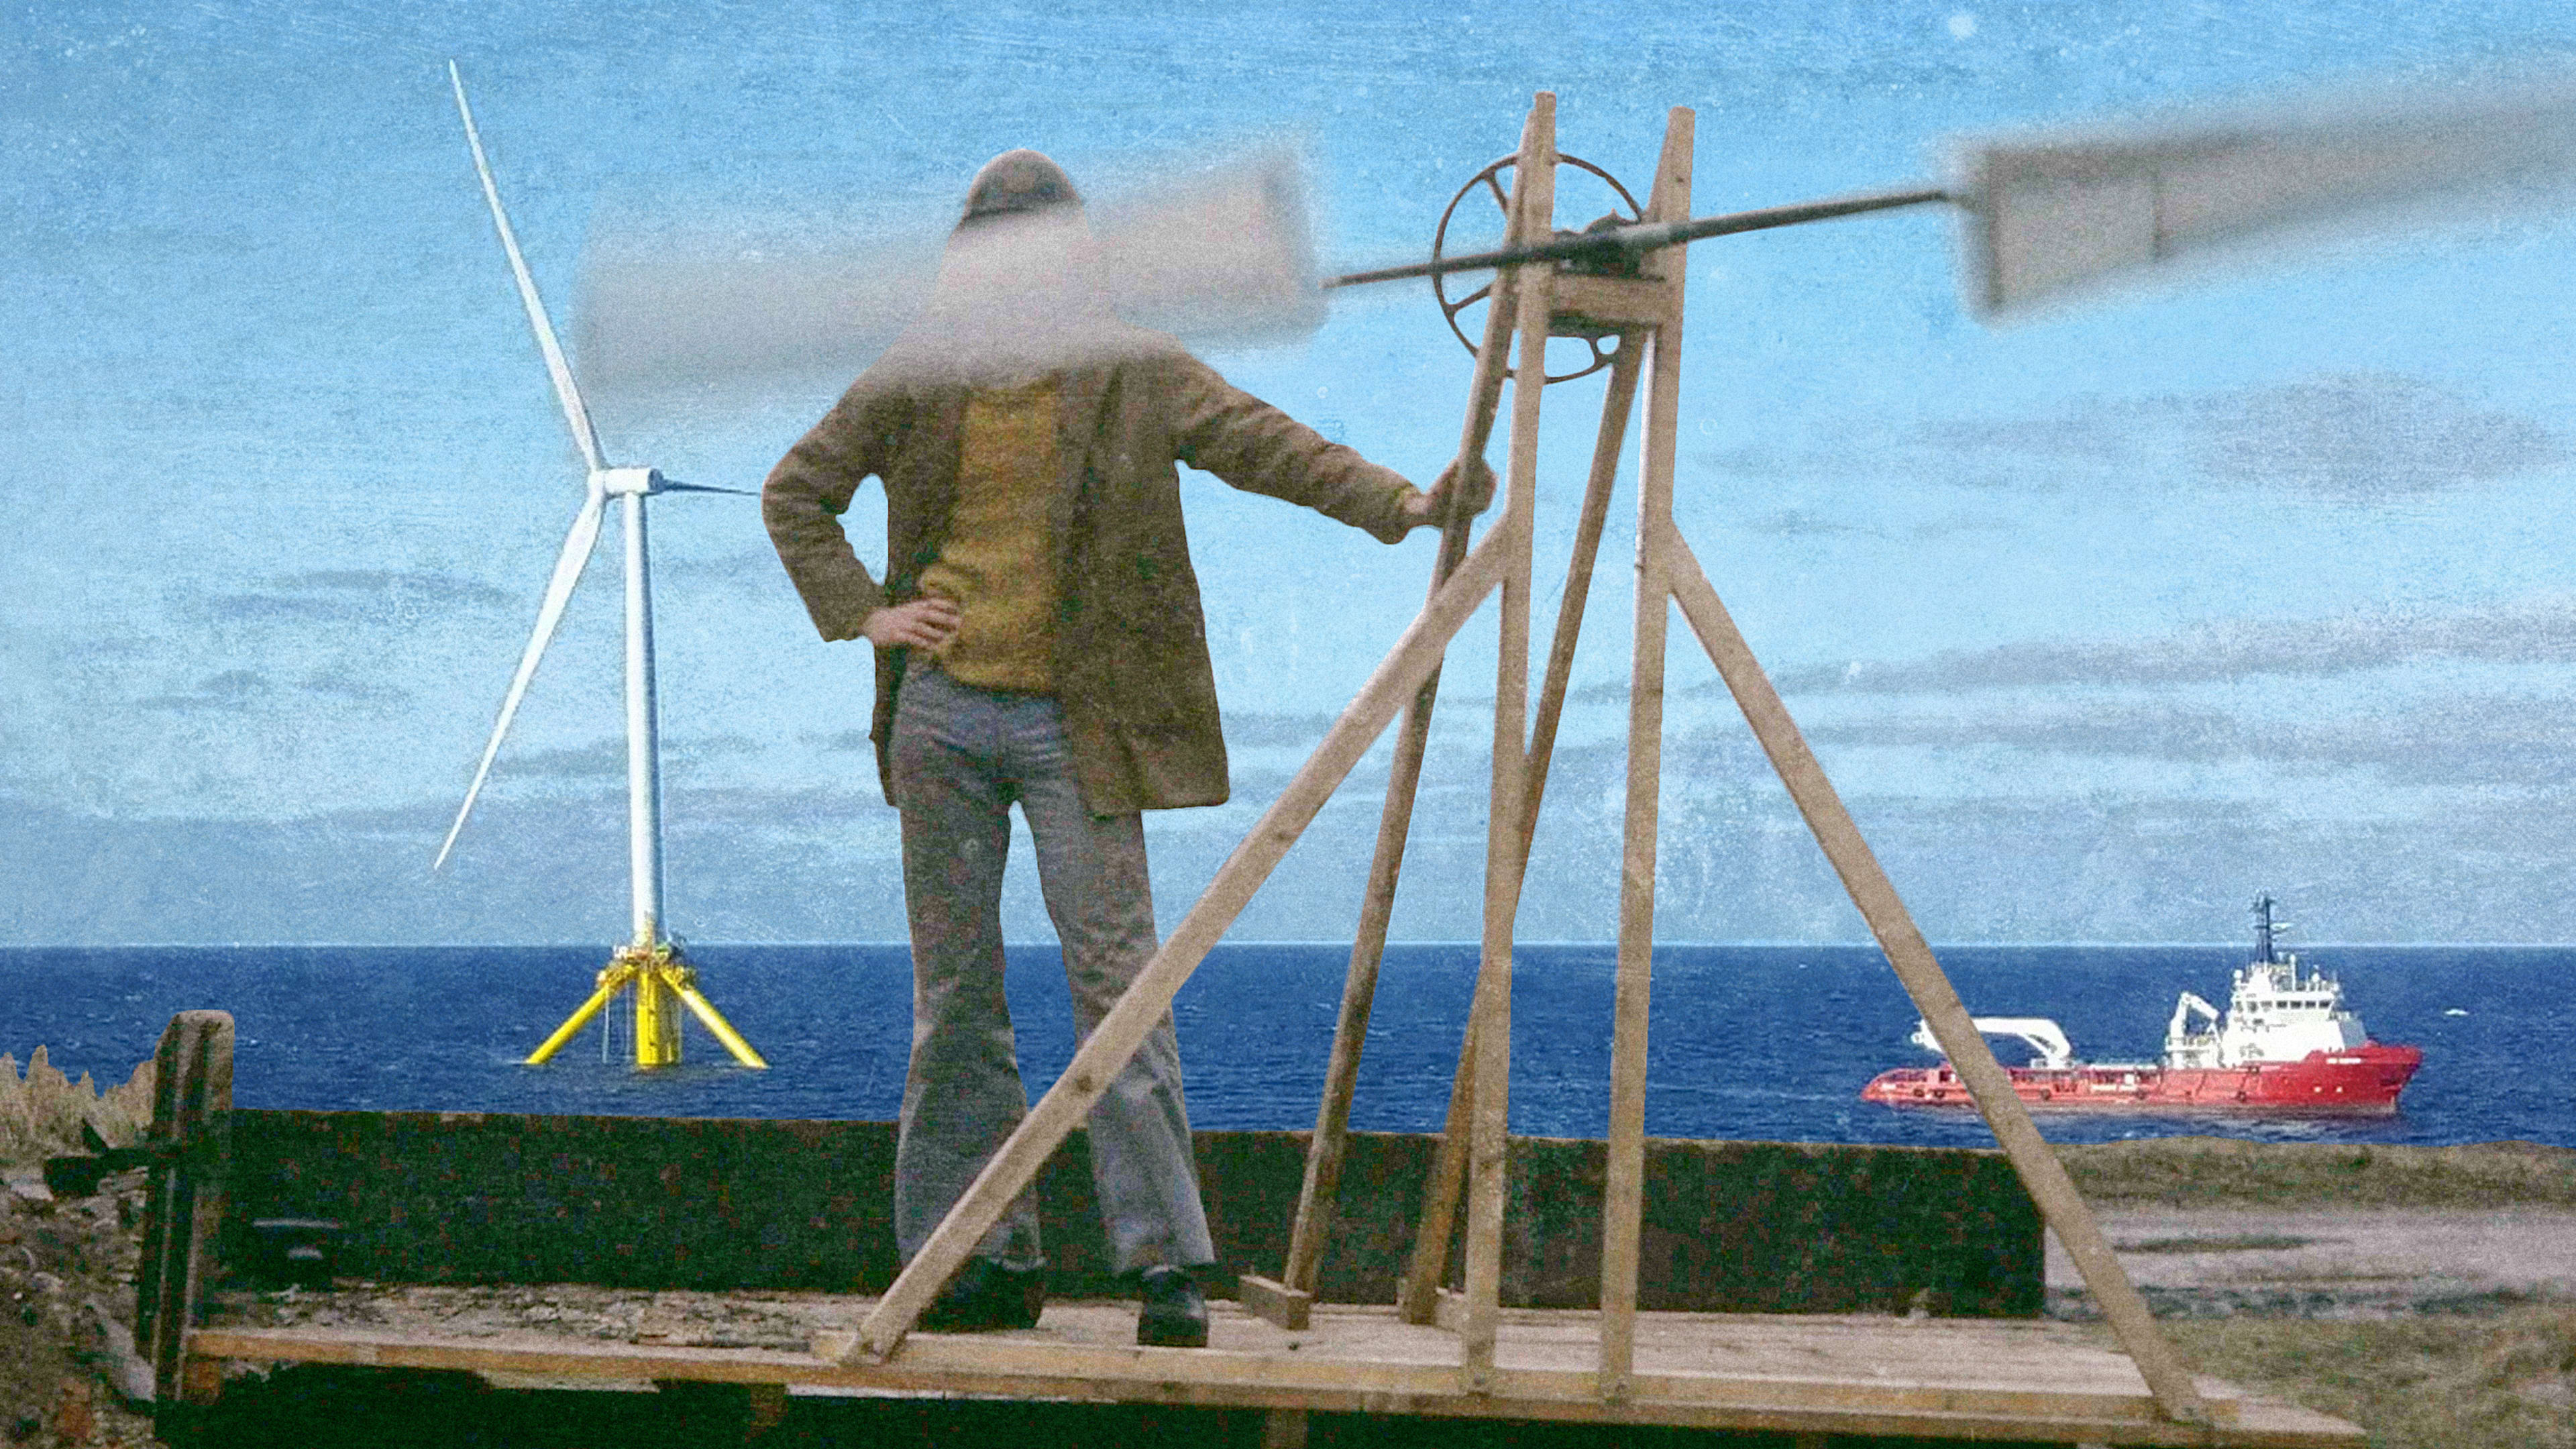 Henrik Stiesdal helped create wind power as we know it. Will he usher in its next chapter?